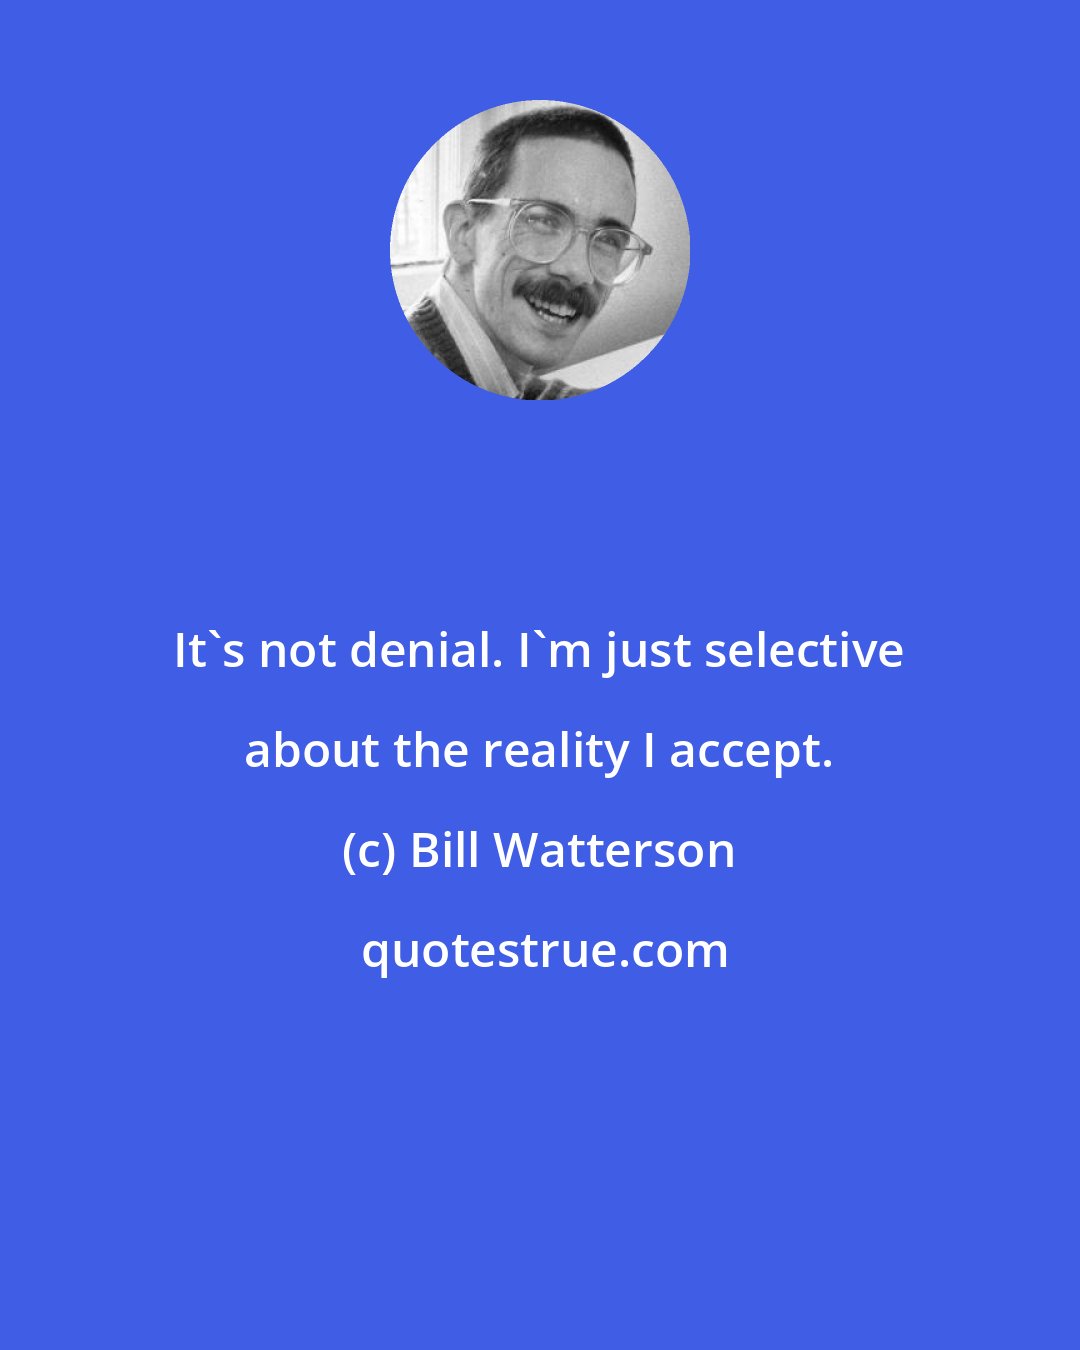 Bill Watterson: It's not denial. I'm just selective about the reality I accept.